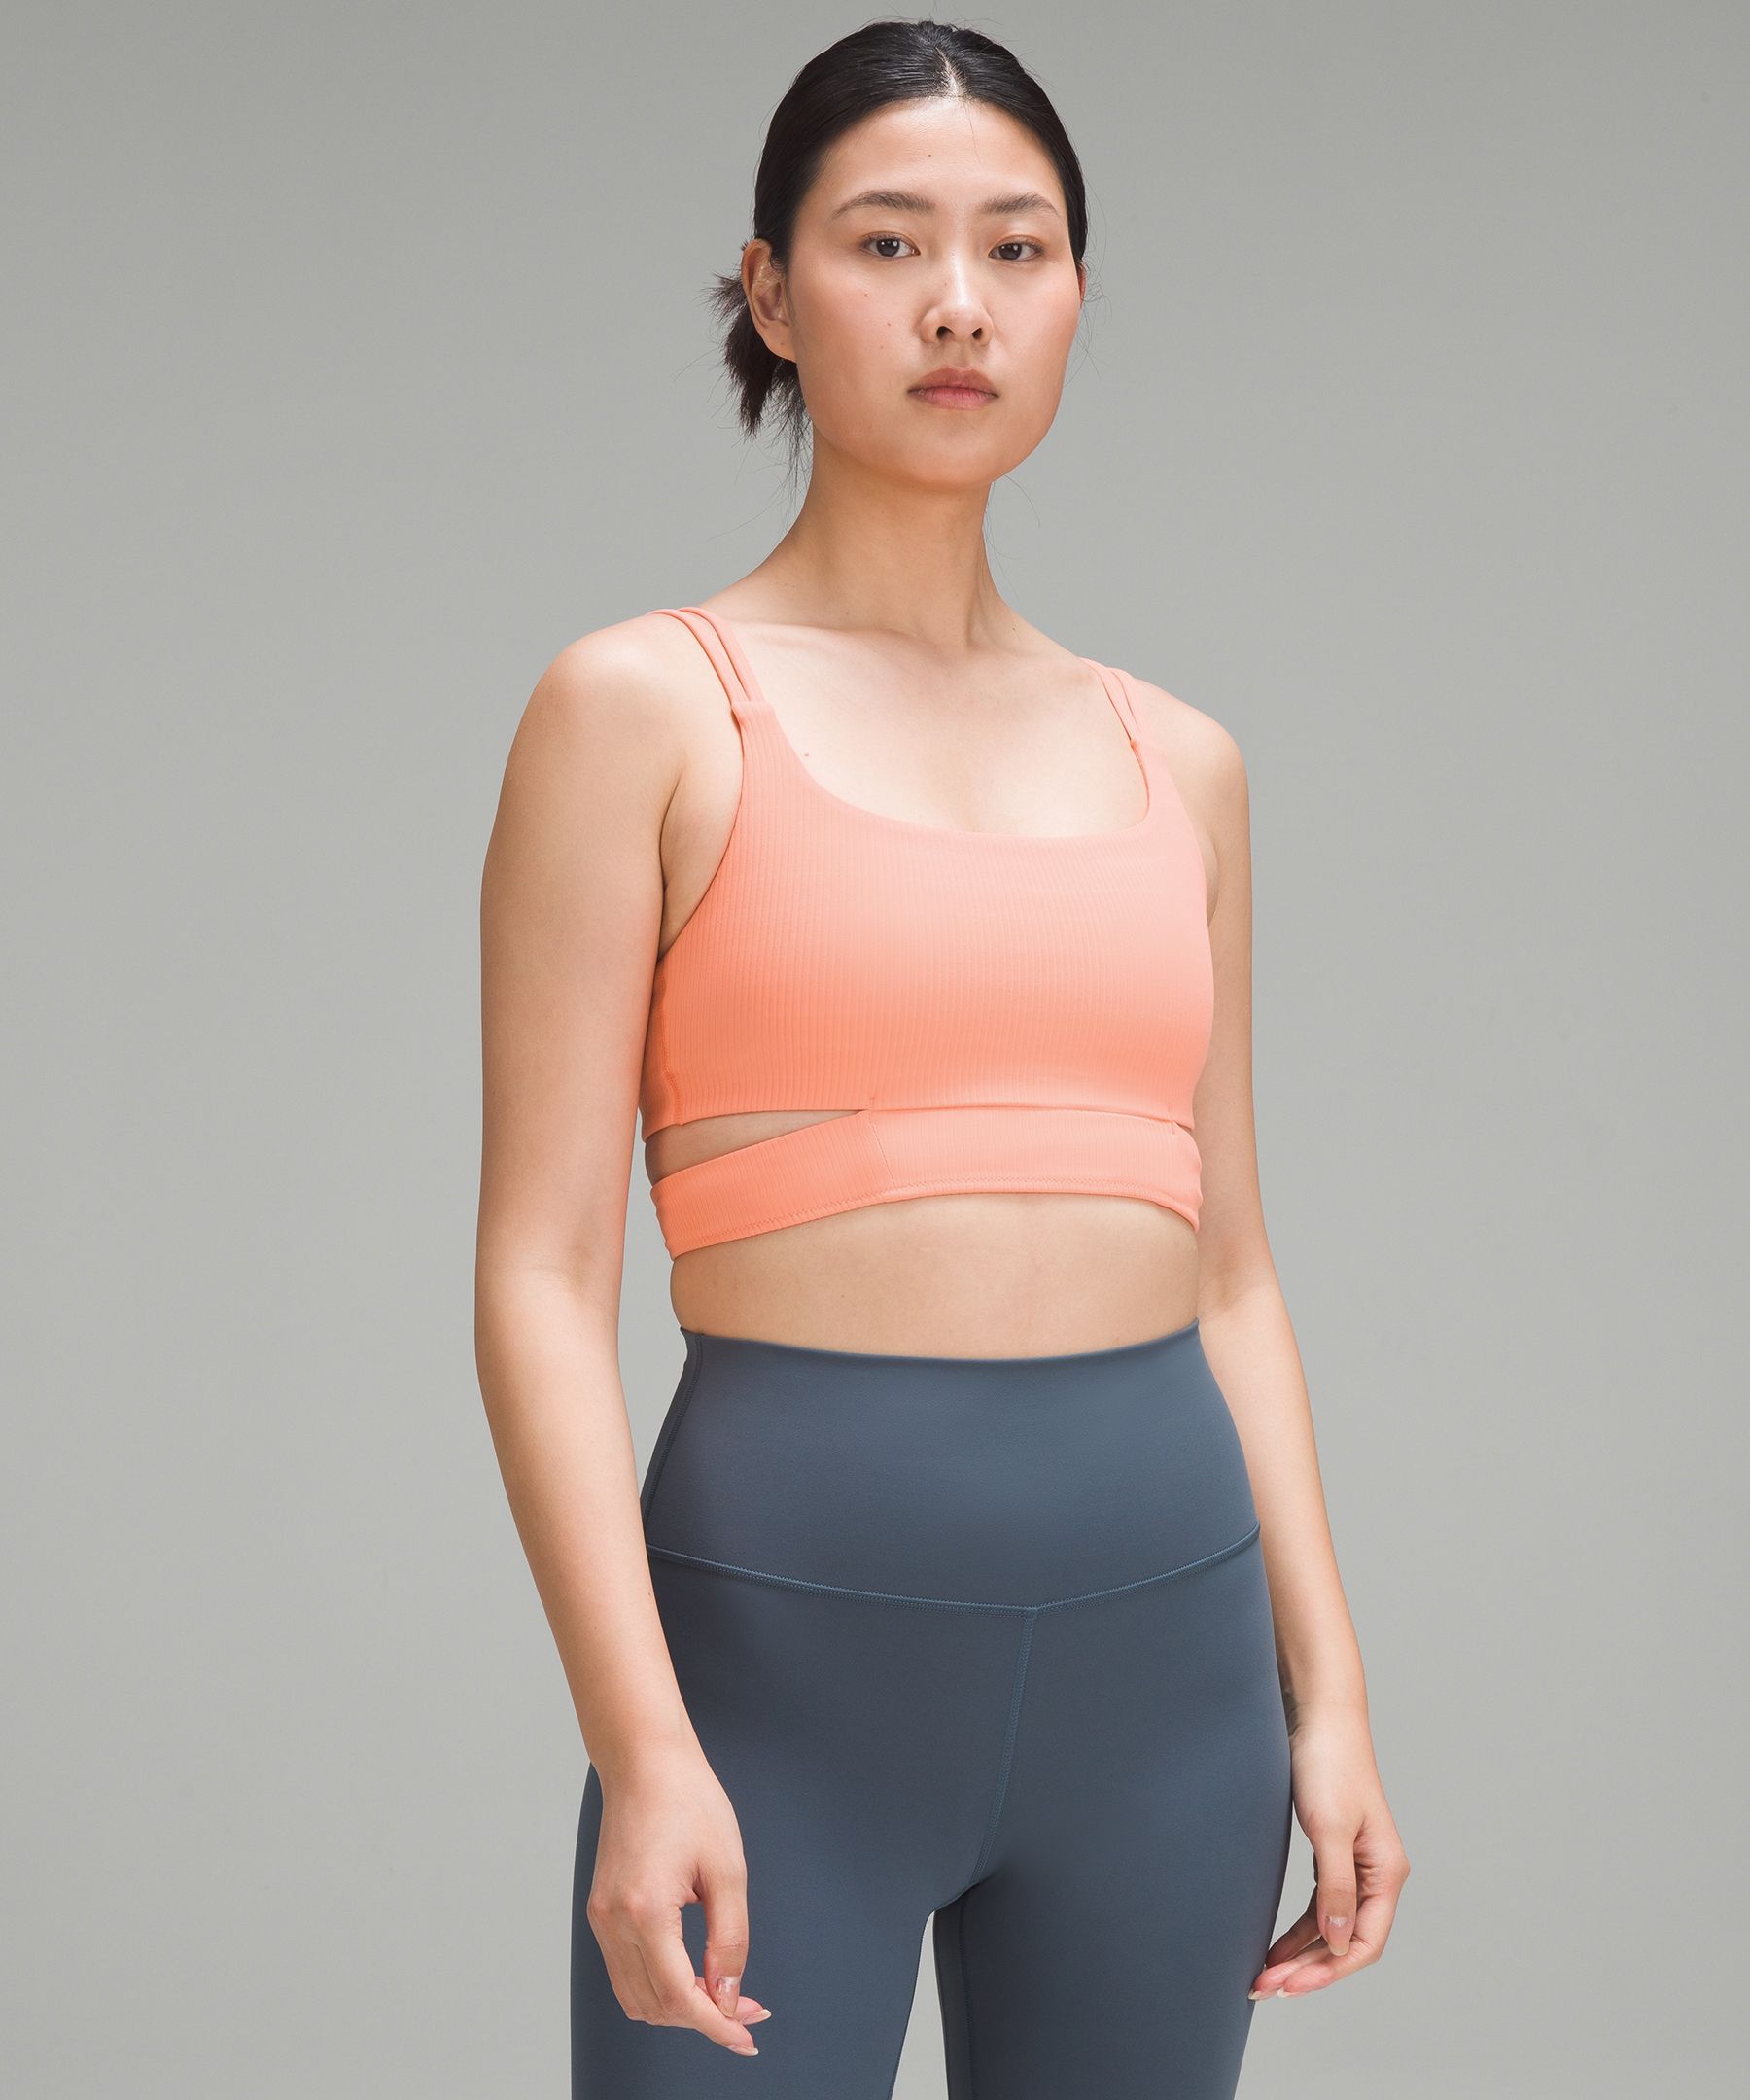 Has anyone tried the nulu strappy yoga bra before? How's the fit and